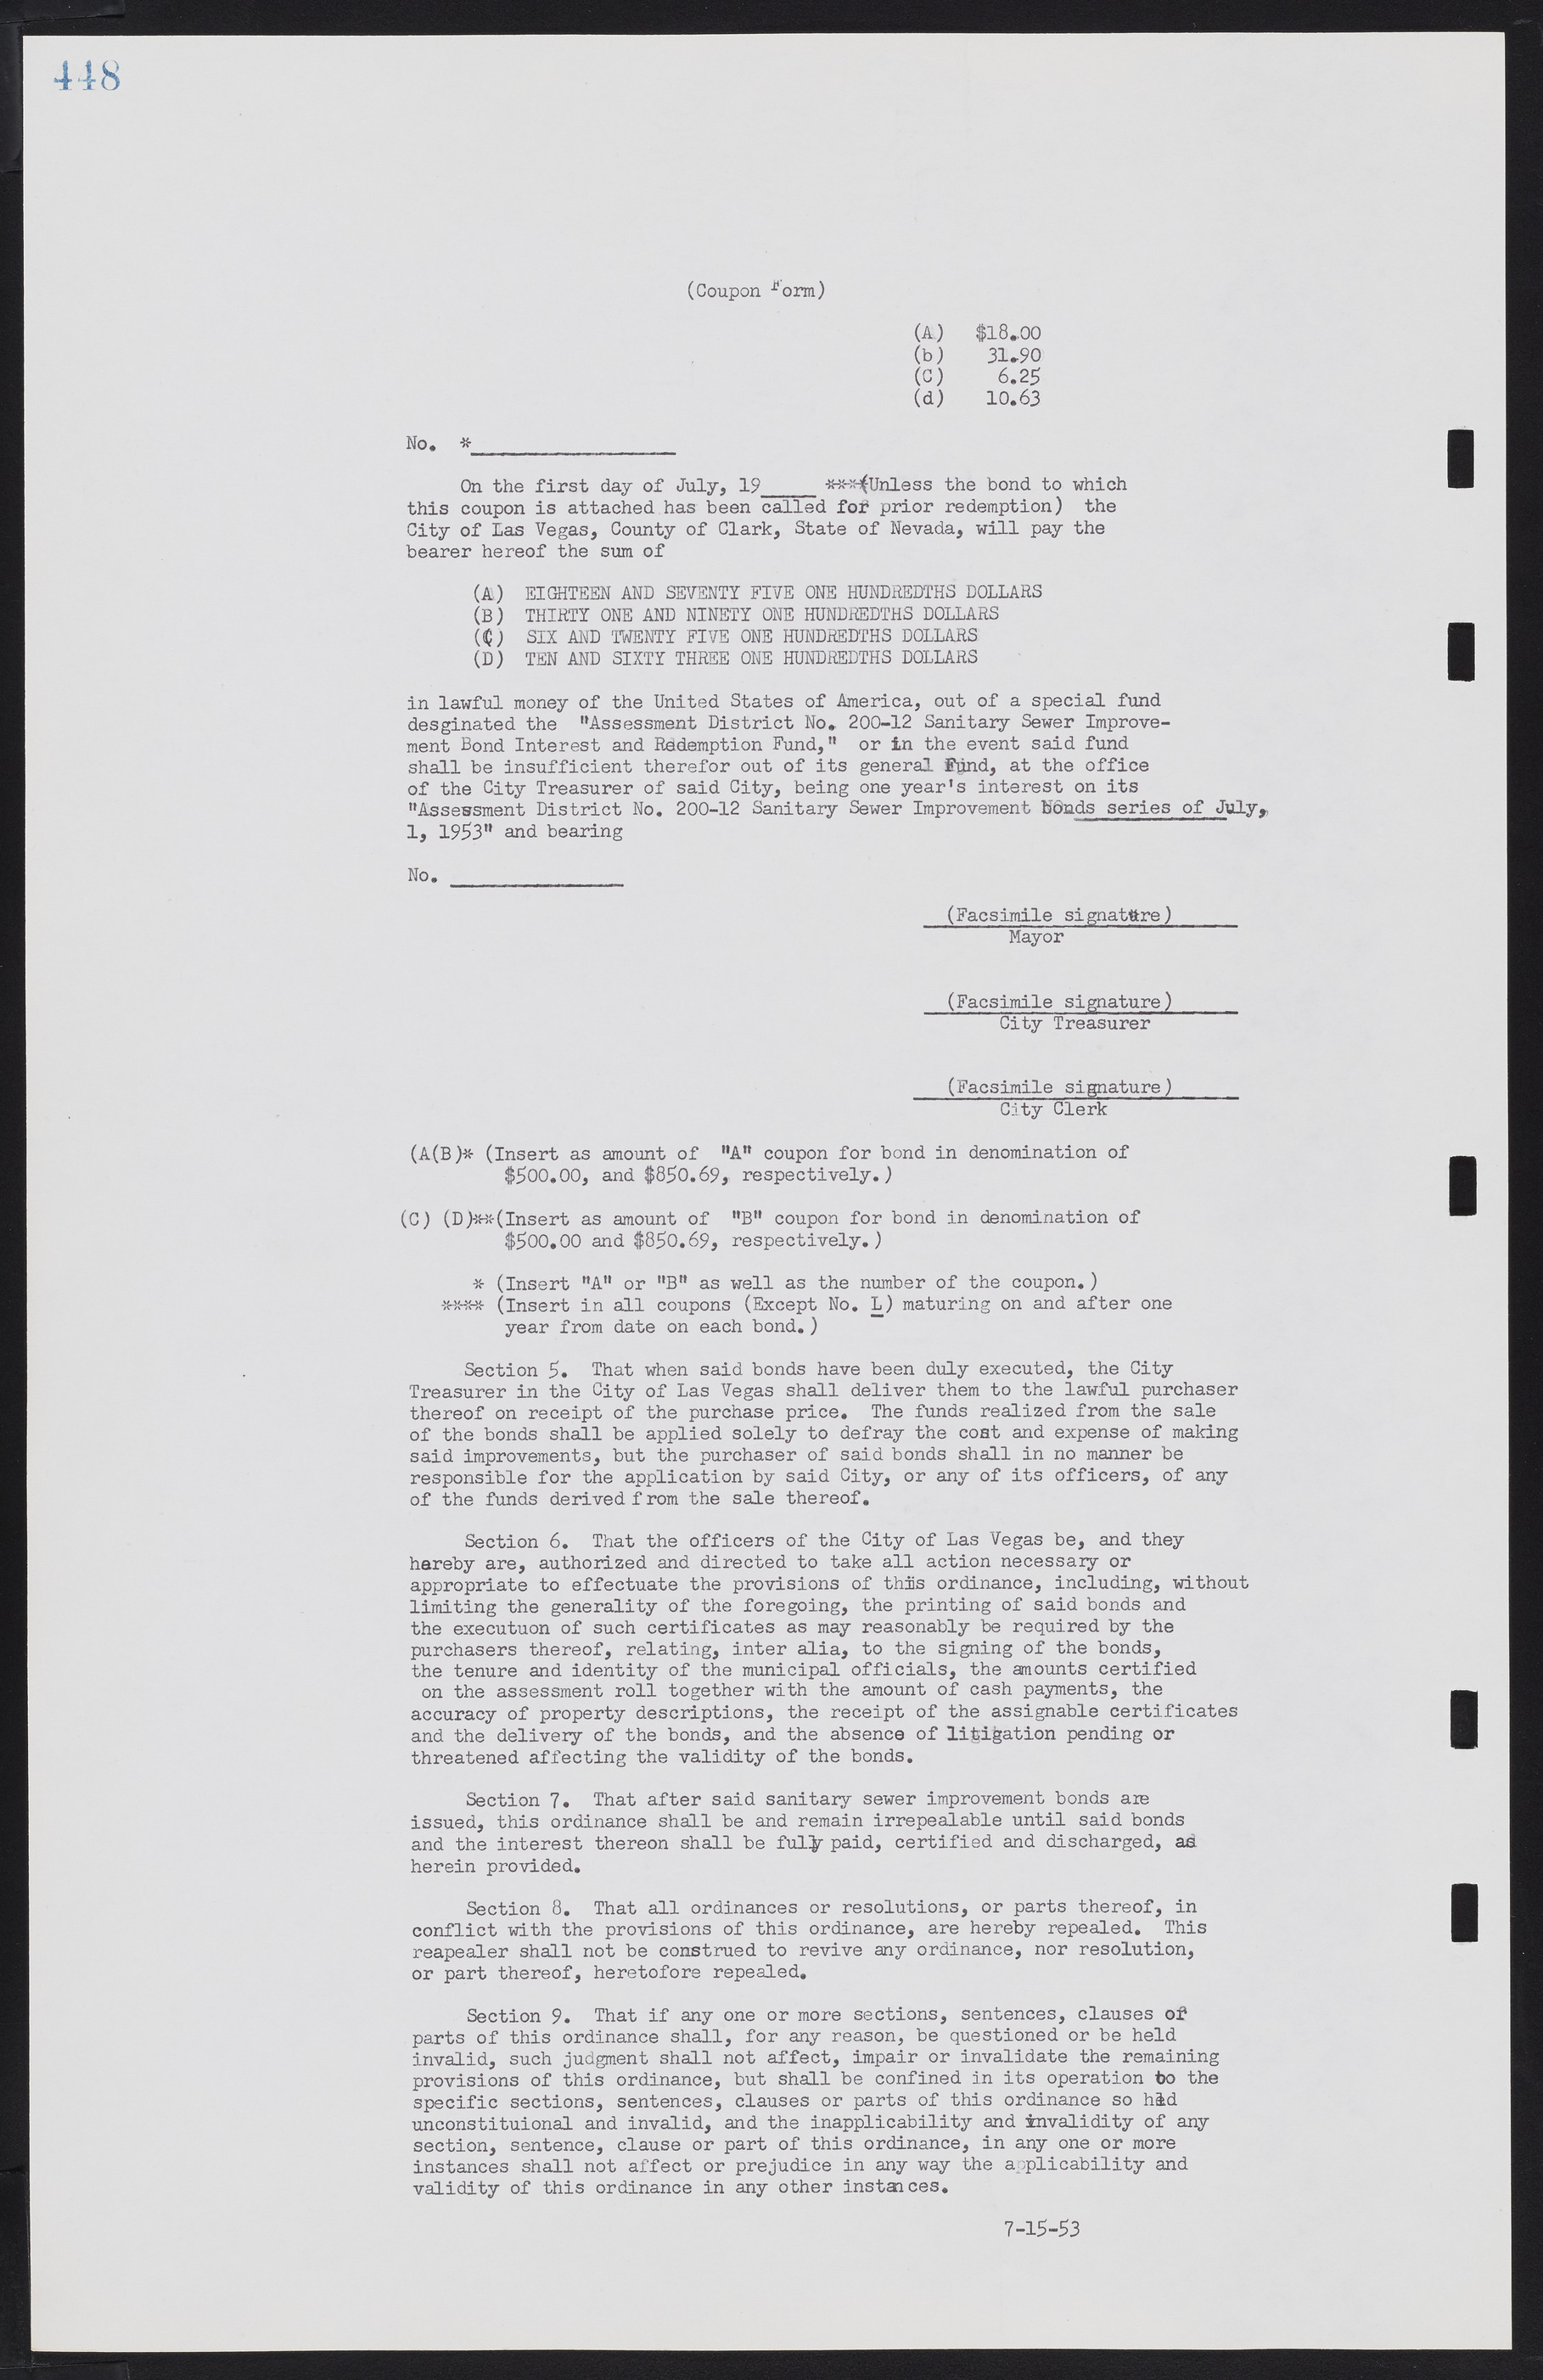 Las Vegas City Commission Minutes, May 26, 1952 to February 17, 1954, lvc000008-478